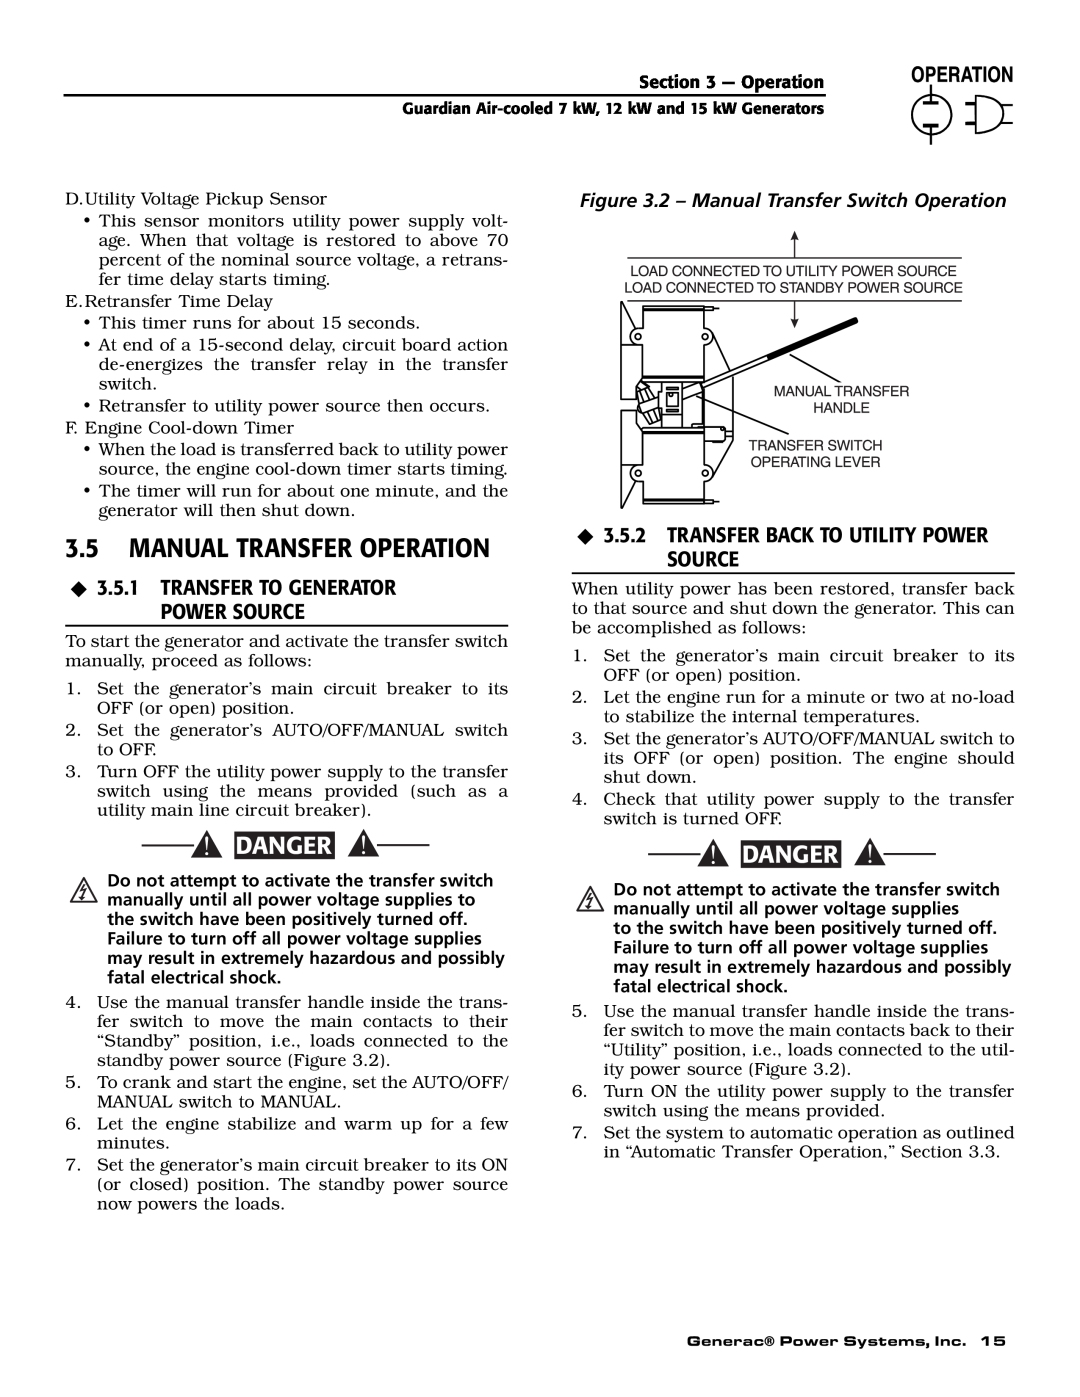 Generac Power Systems 04758-1, 04759-1, 04760-1 Manual Transfer Operation, ‹ 3.5.2 TRANSFER BACK TO UTILITY POWER SOURCE 